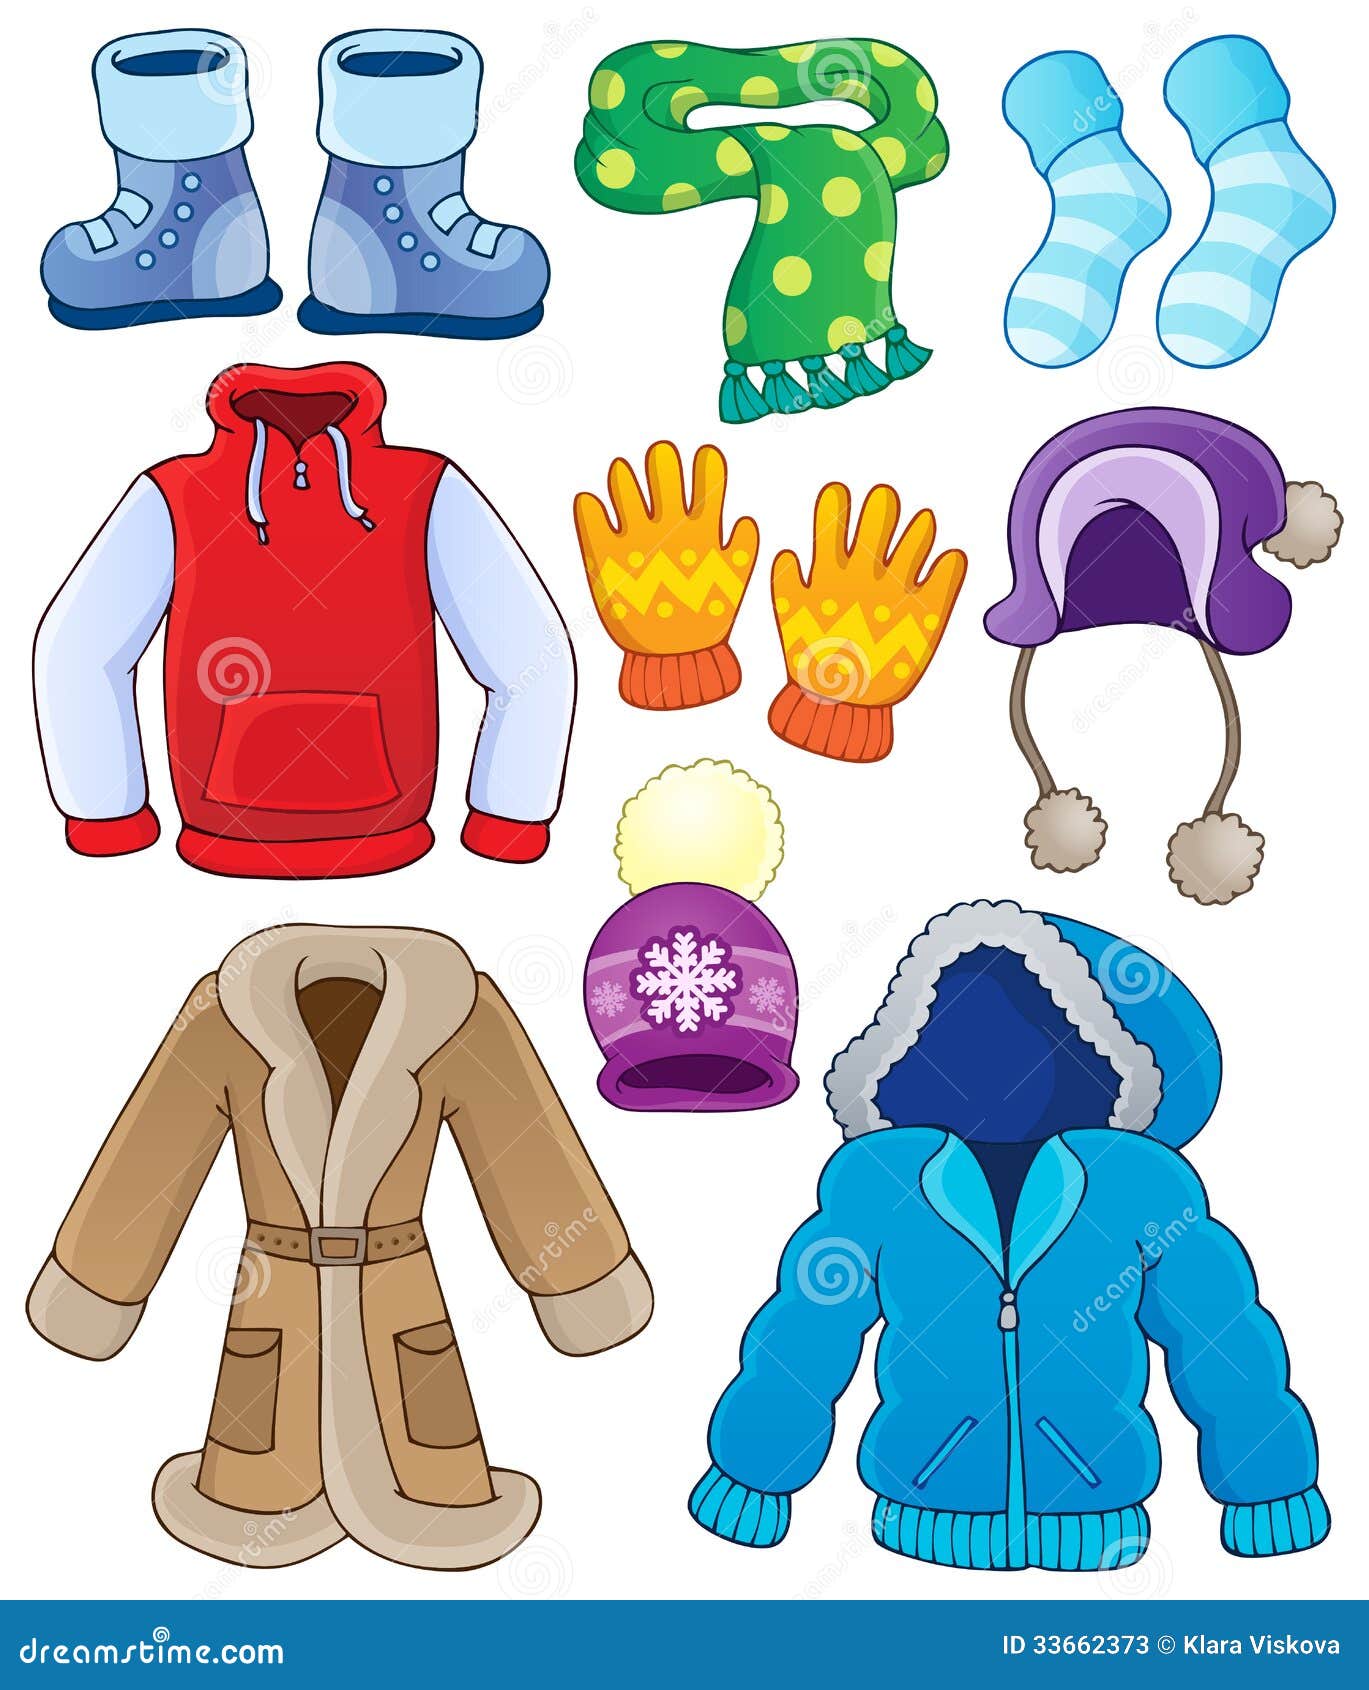 https://thumbs.dreamstime.com/z/winter-clothes-collection-eps-vector-illustration-33662373.jpg